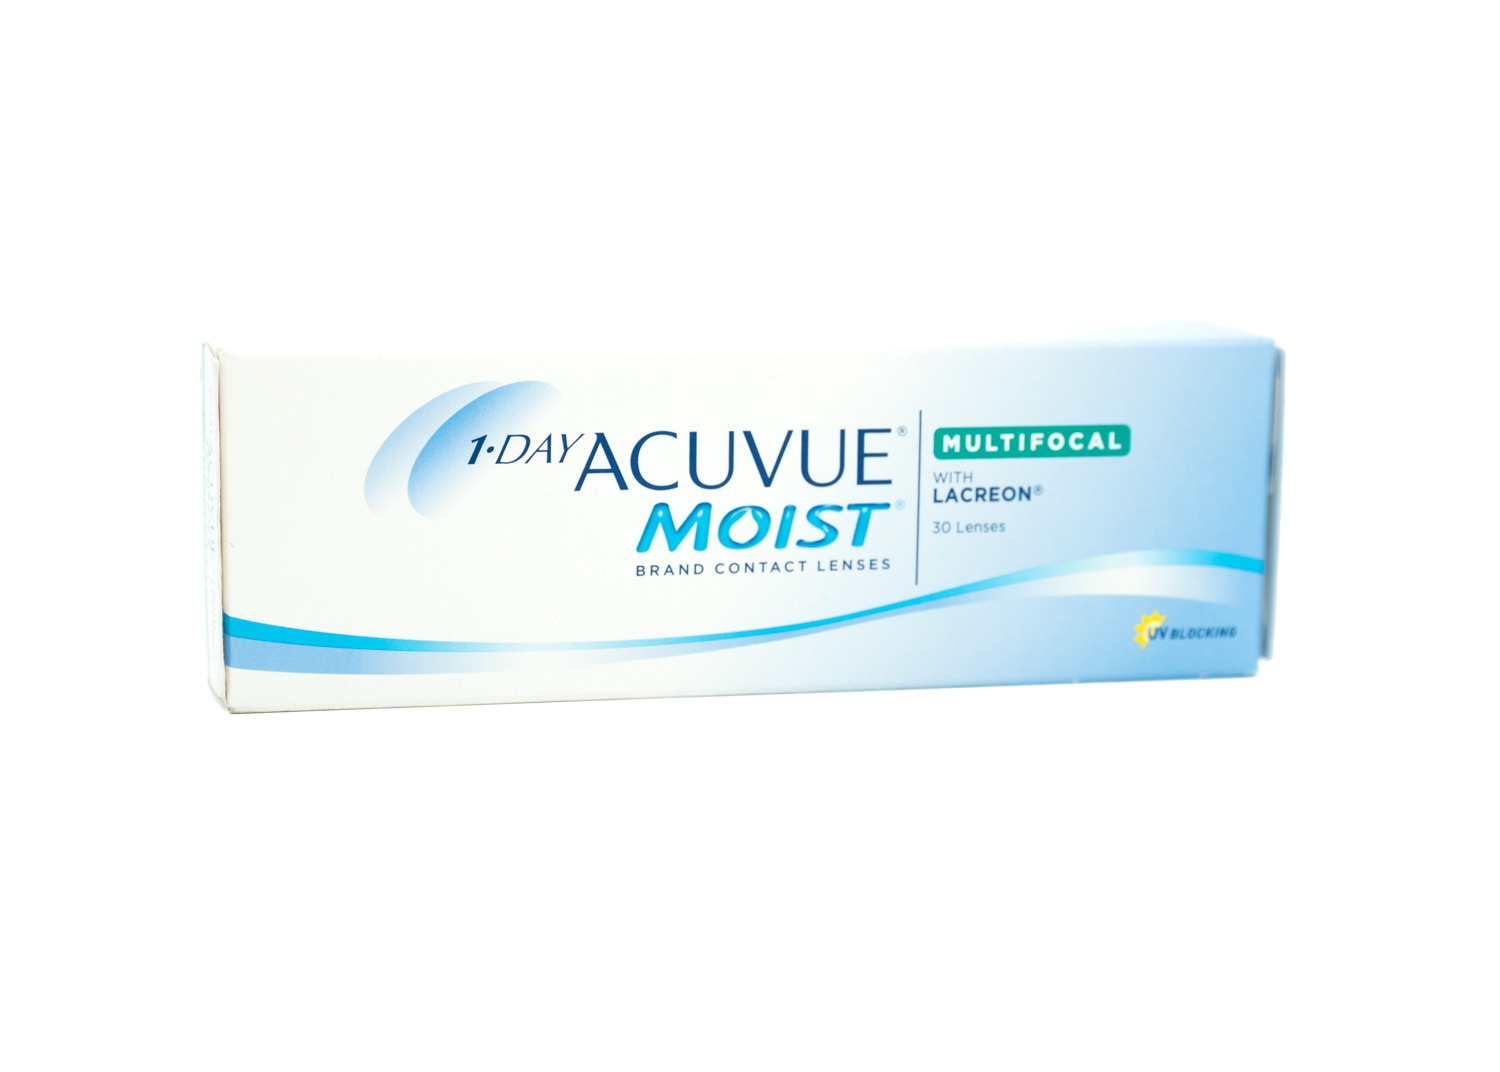 Acuvue MOIST MULTIFOCAL 1DAY